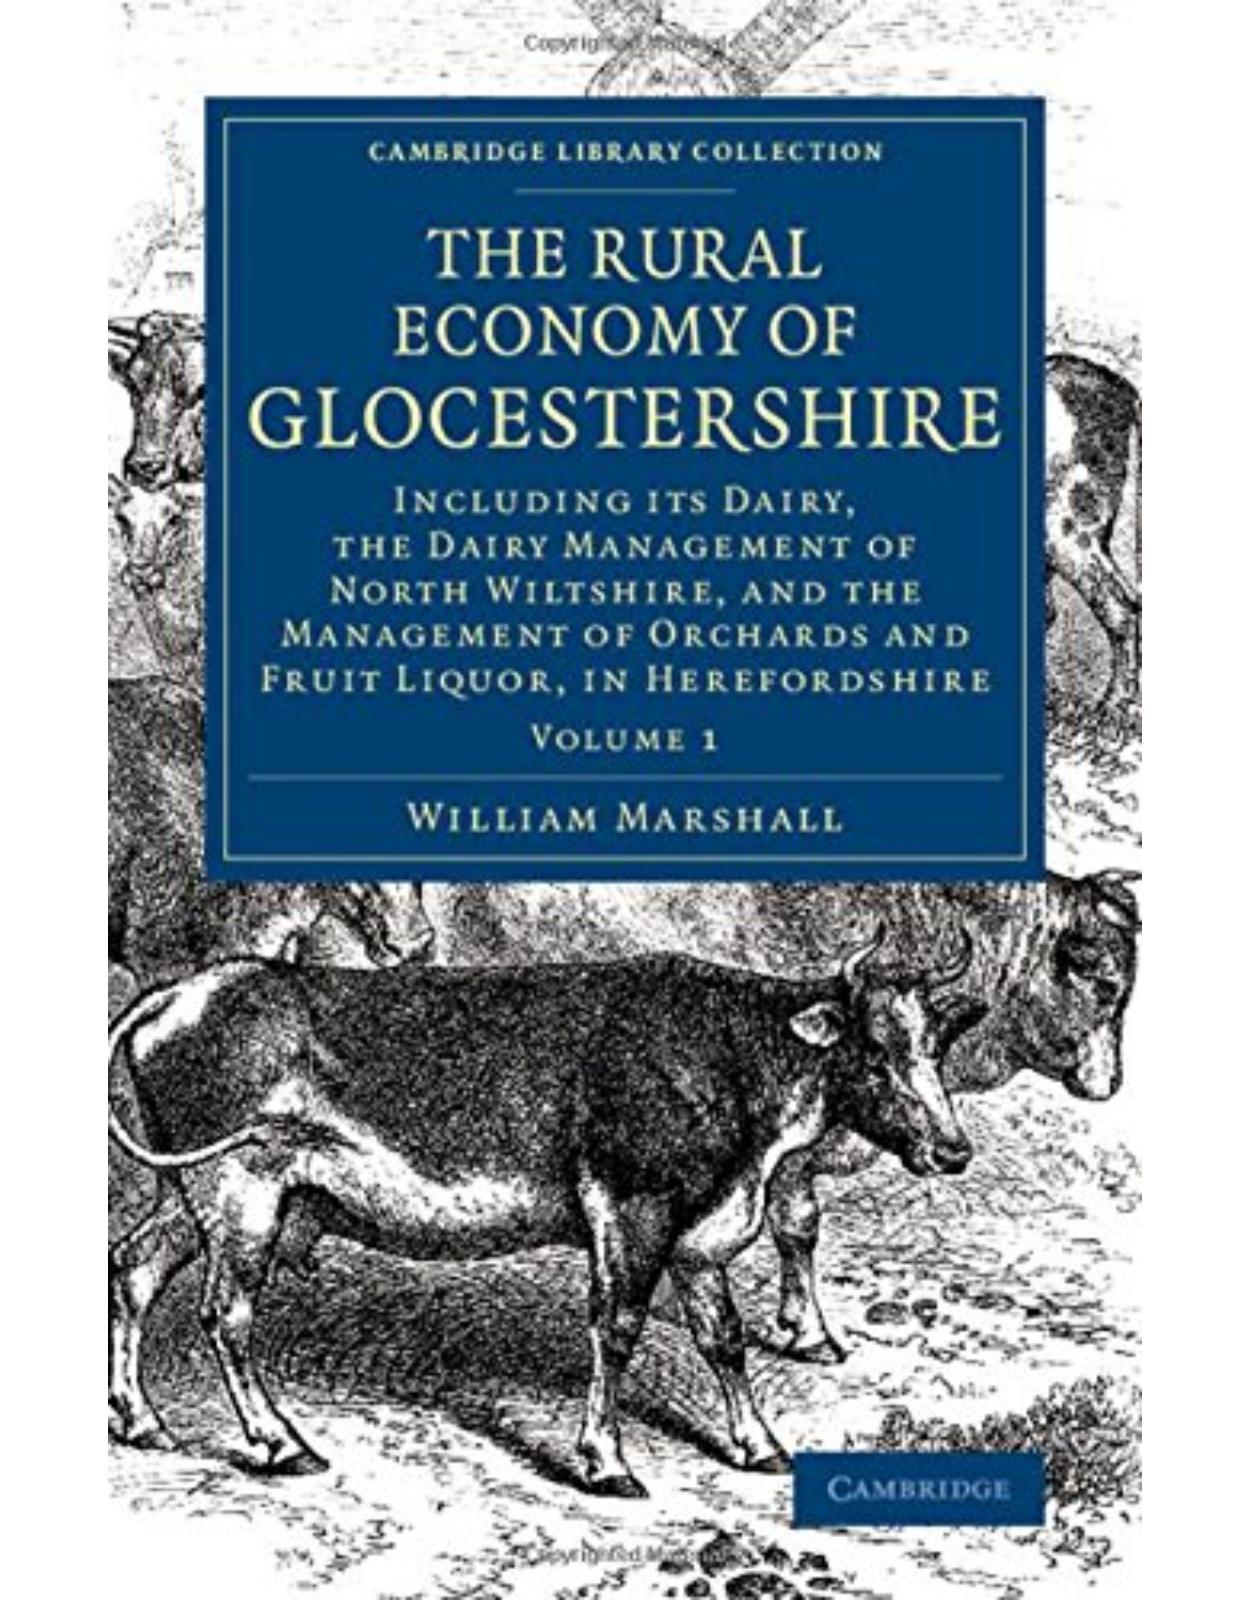 The Rural Economy of Glocestershire: Including its Dairy, Together with the Dairy Management of North Wiltshire, and the Management of Orchards and Fruit Liquor, in Herefordshire (Volume 1)